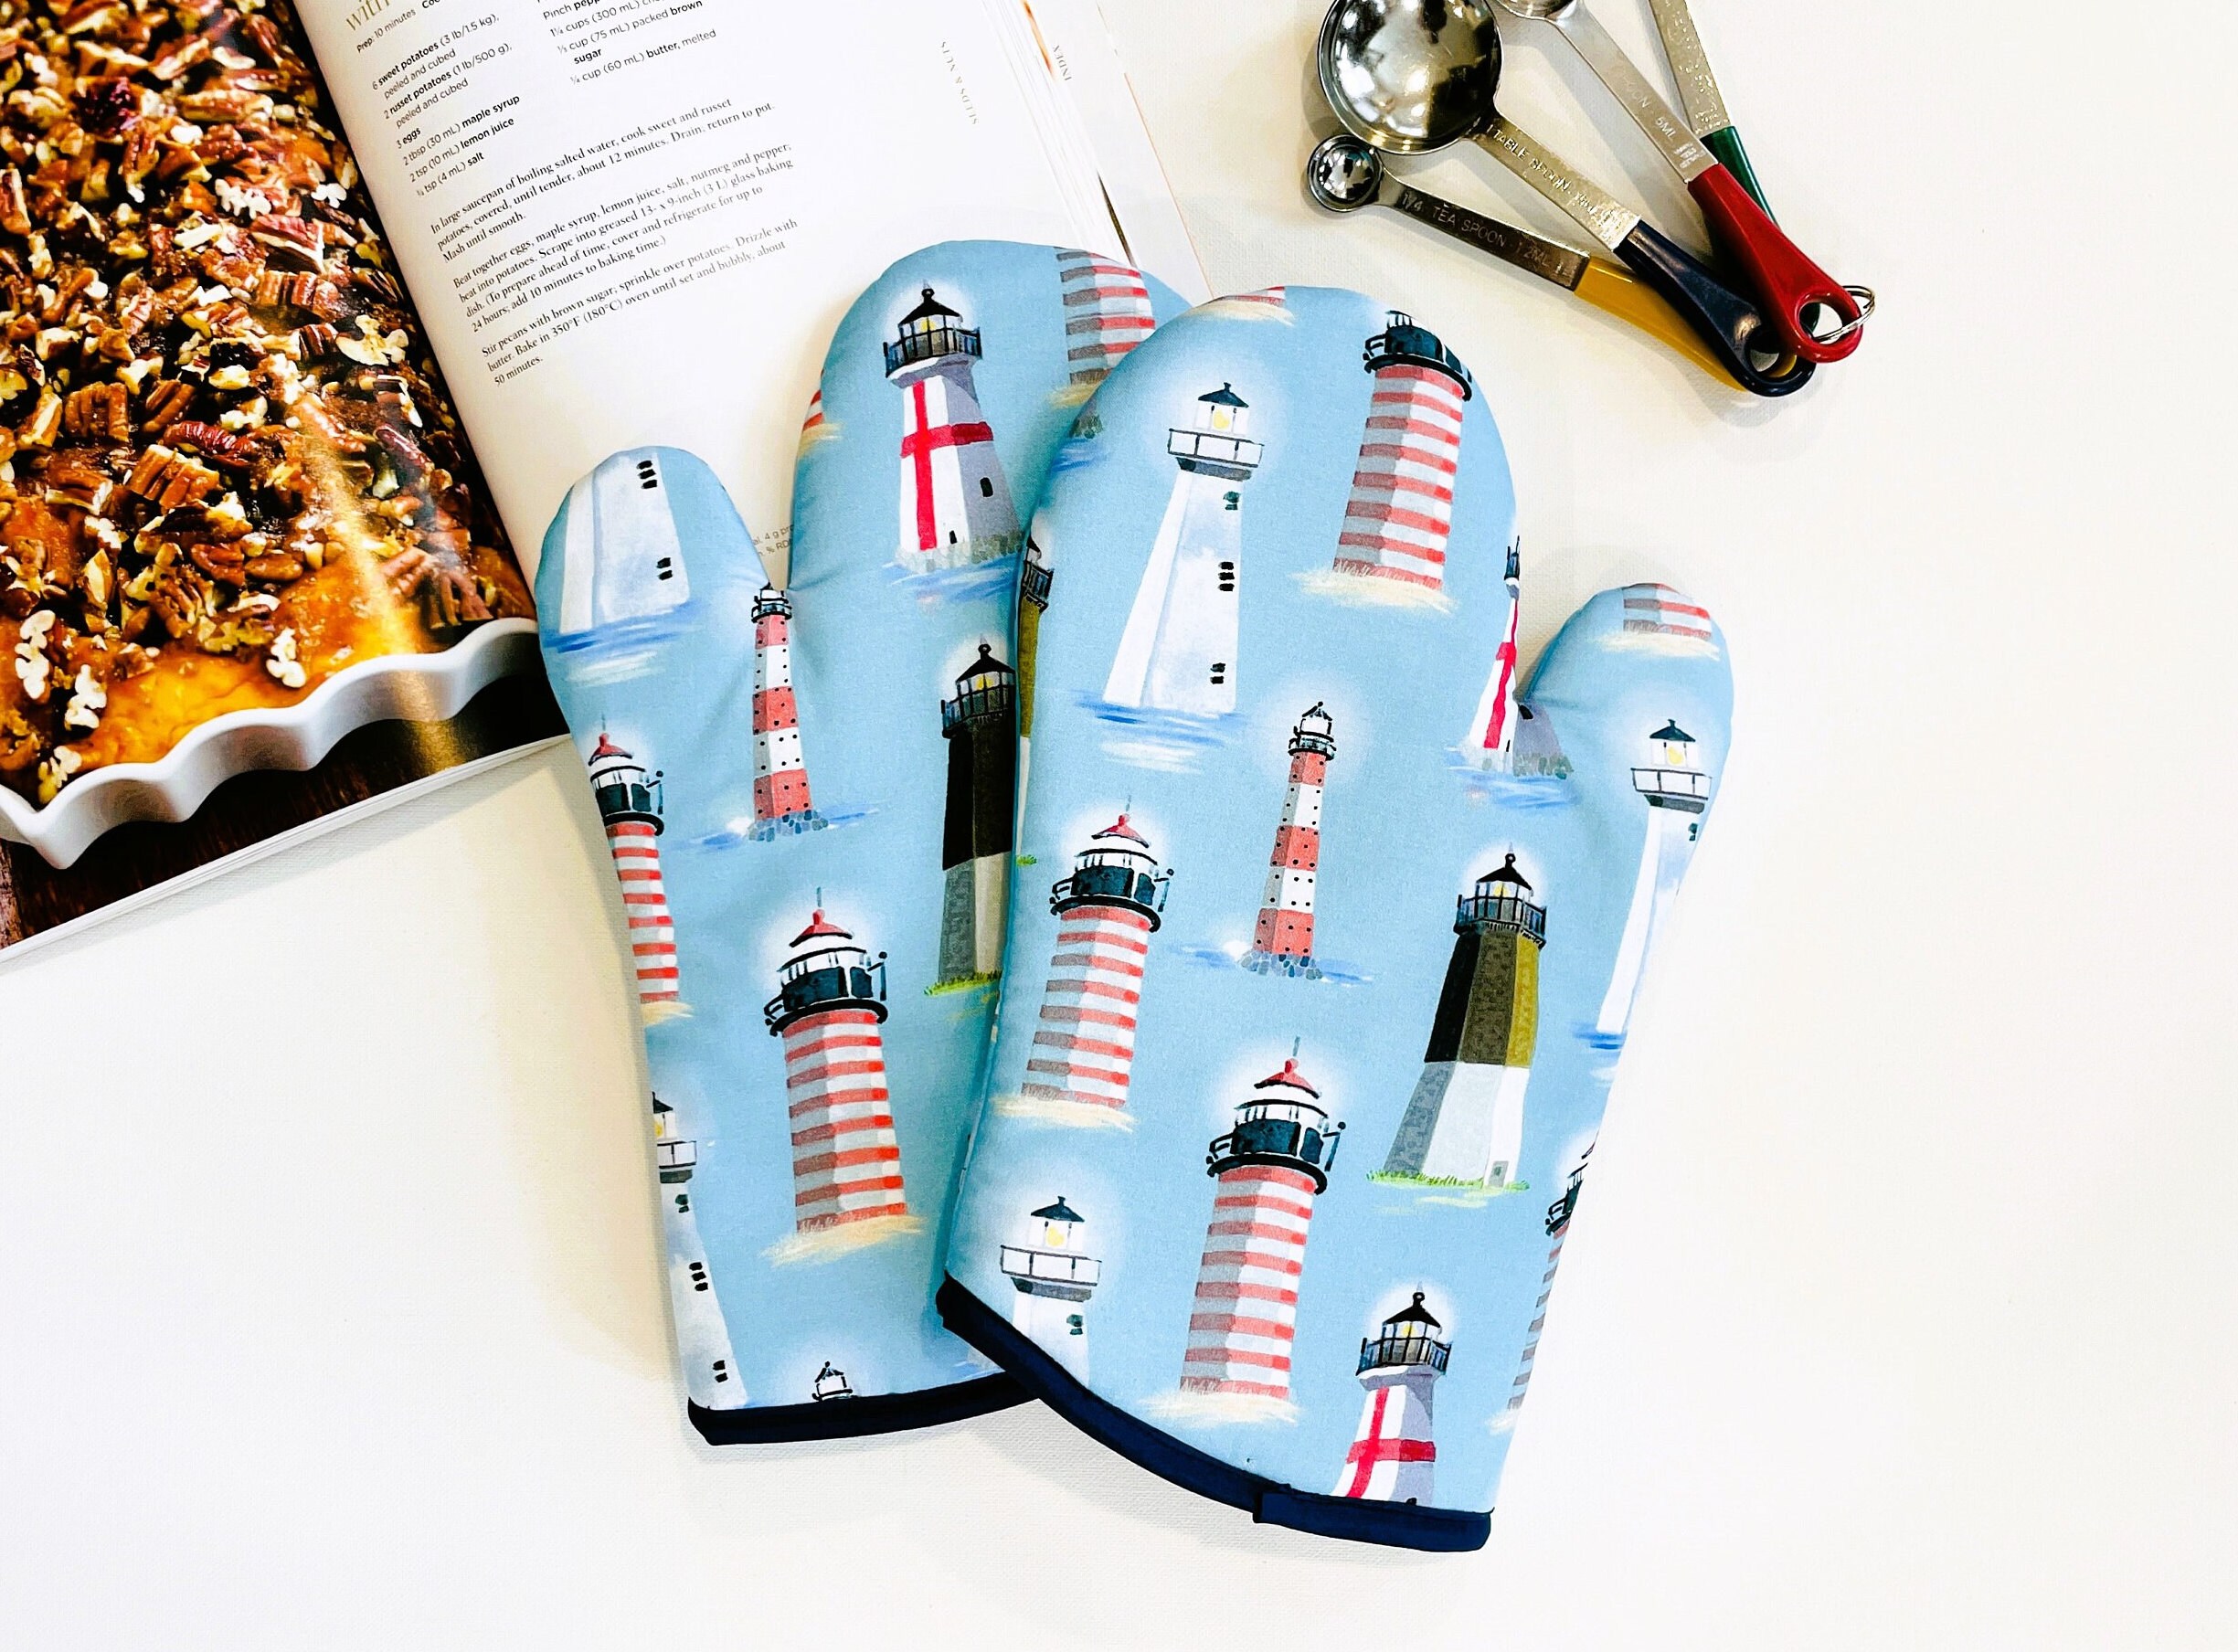 Whales Pattern Kitchen Oven Mittens Art Sea Ceatures Oven Mitt Cute Pot  Hotpads for Cooking Gift for Bakers Fish Pattern Oven Gloves ZZ8239 